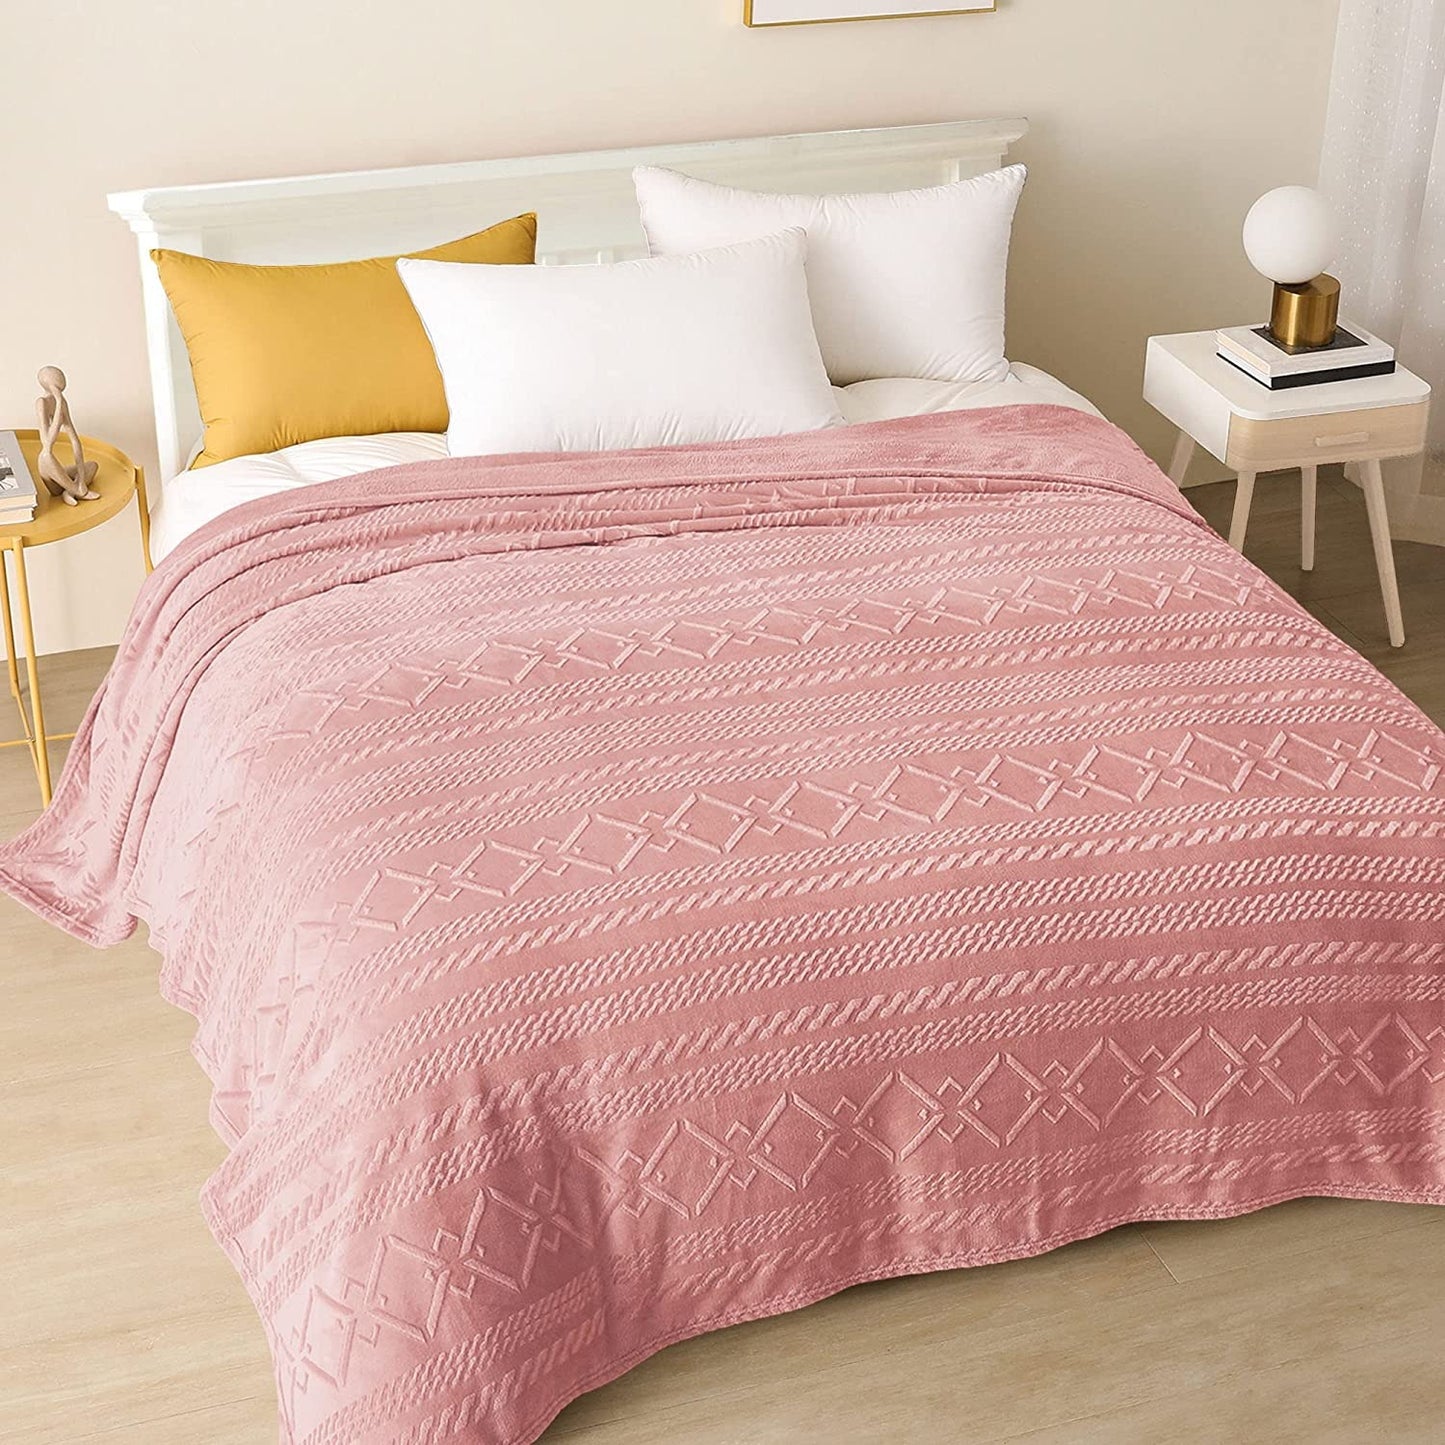 Exclusivo Mezcla King Size Soft Bed Blanket, Warm Fuzzy Luxury Bed Blankets, Decorative Geometry Pattern Plush Throw Blanket for Bed, 90x104 Inches, Pink